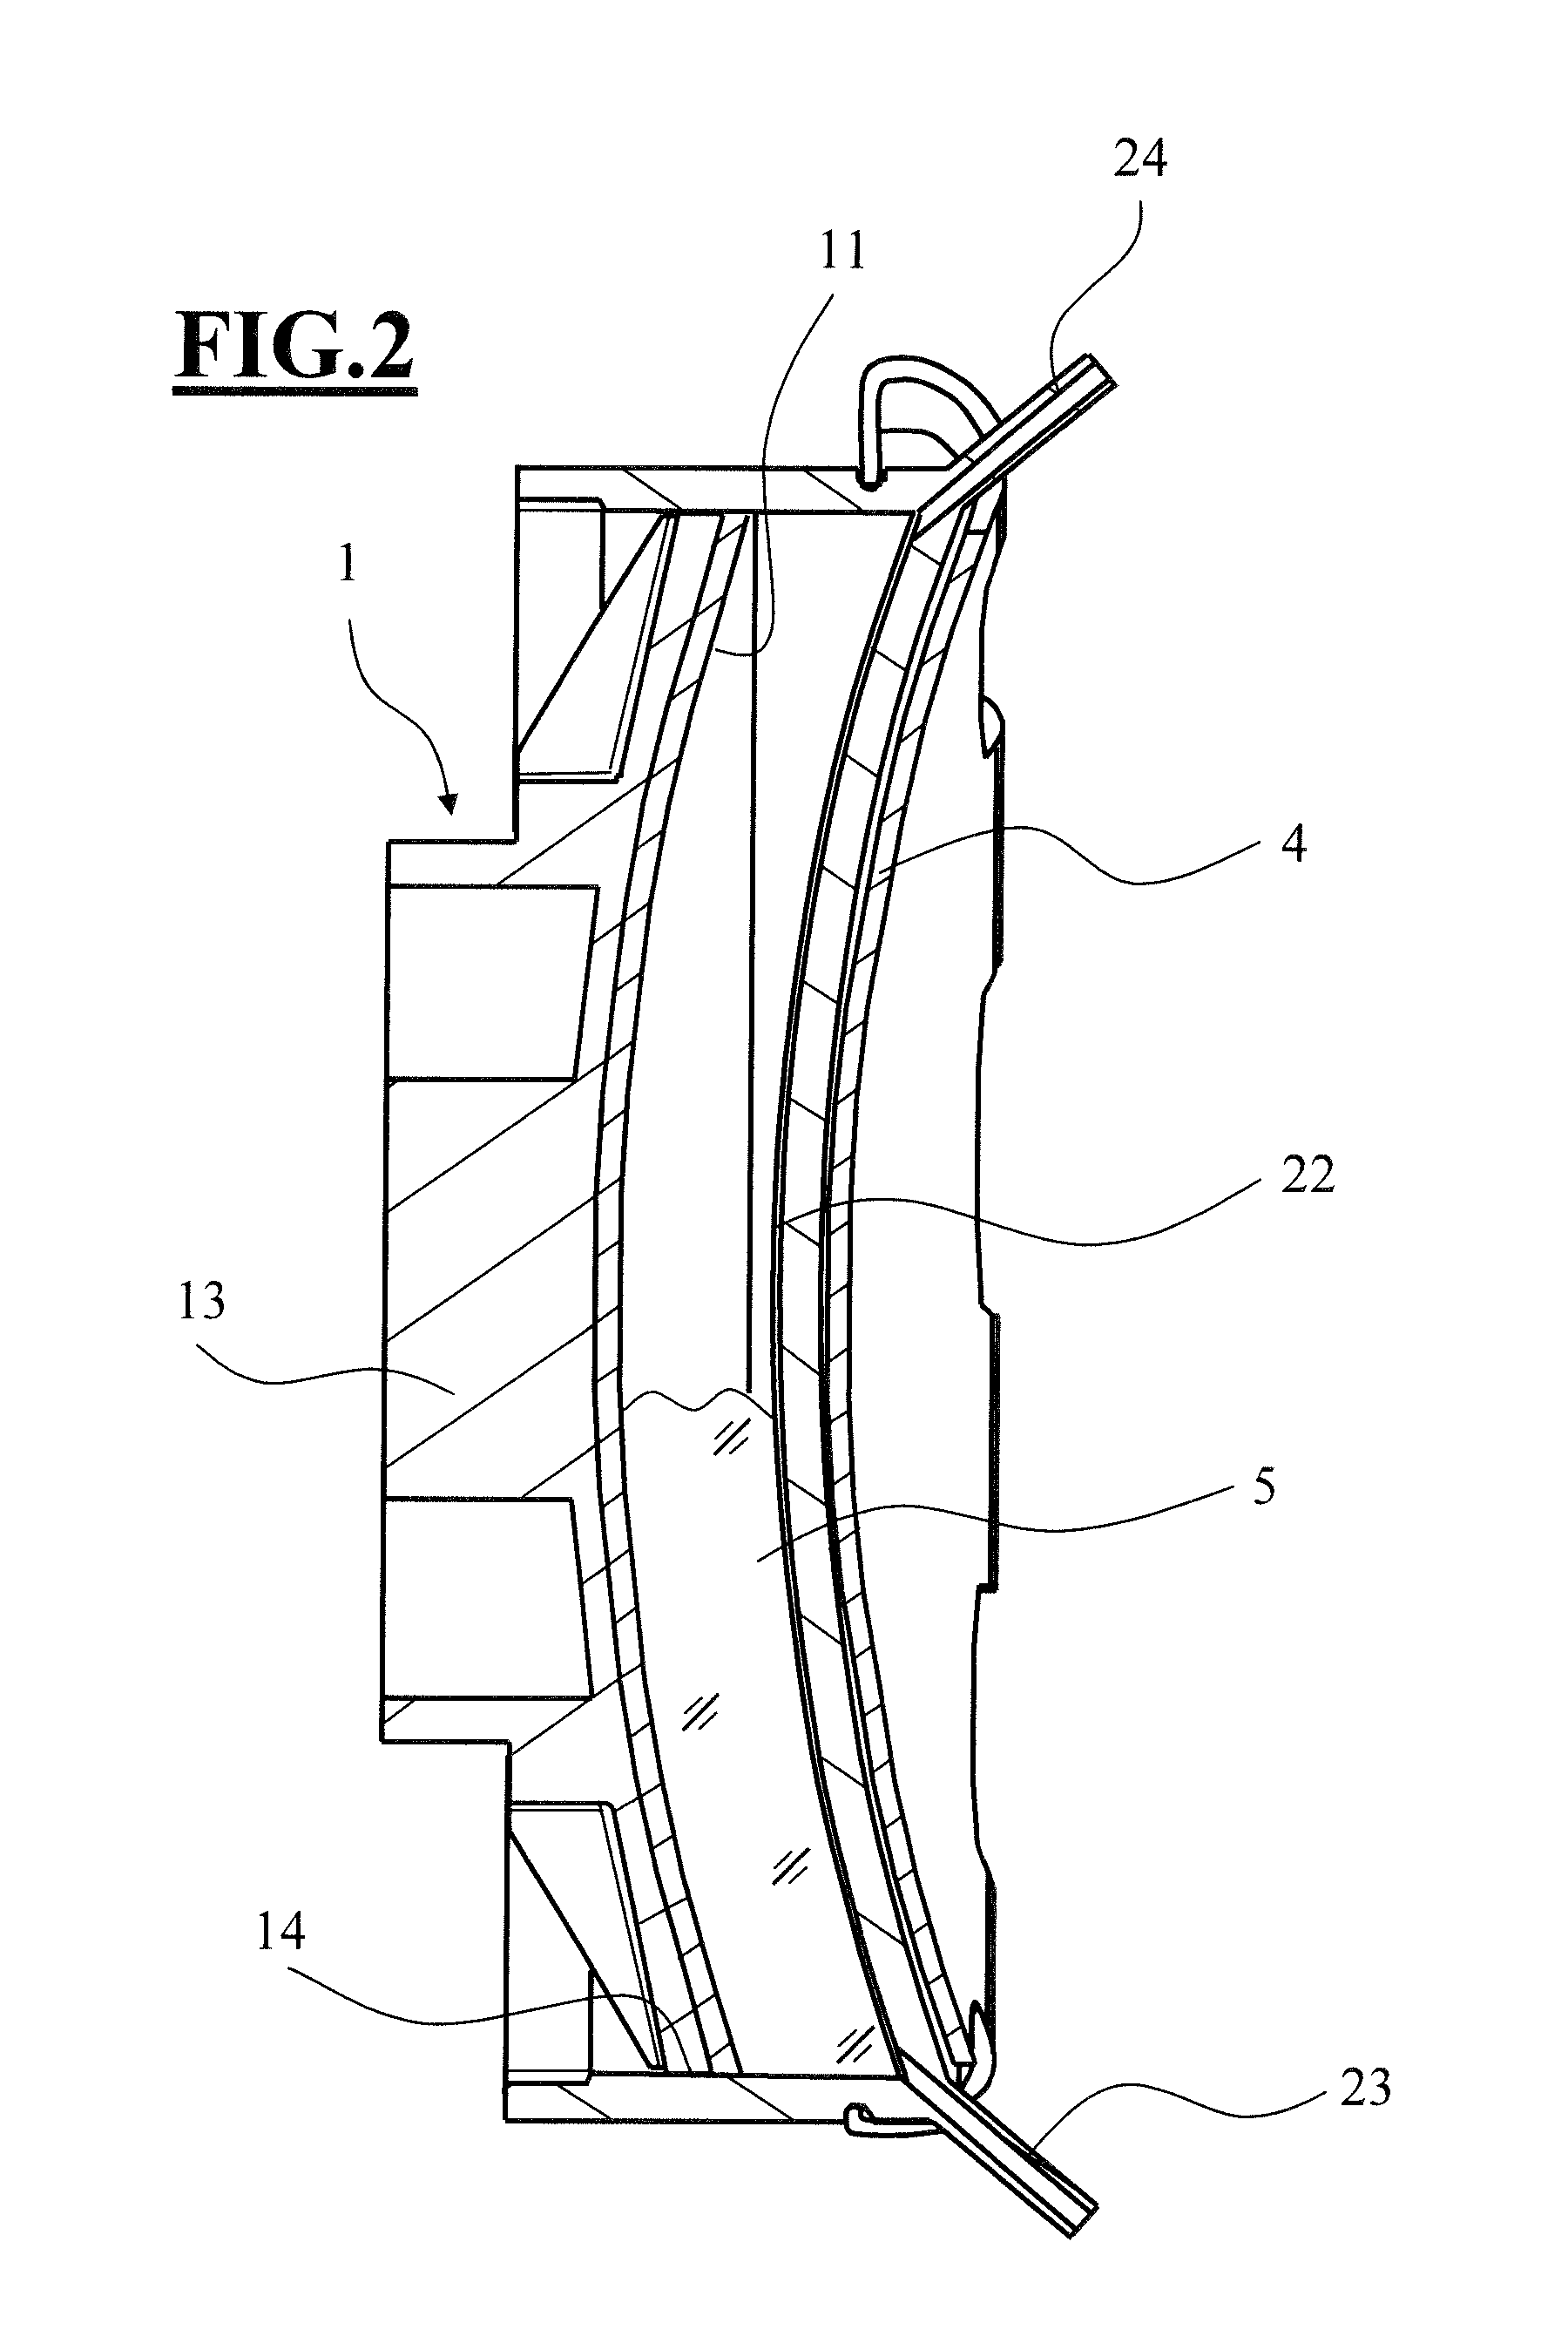 Method of making a spectacle lens